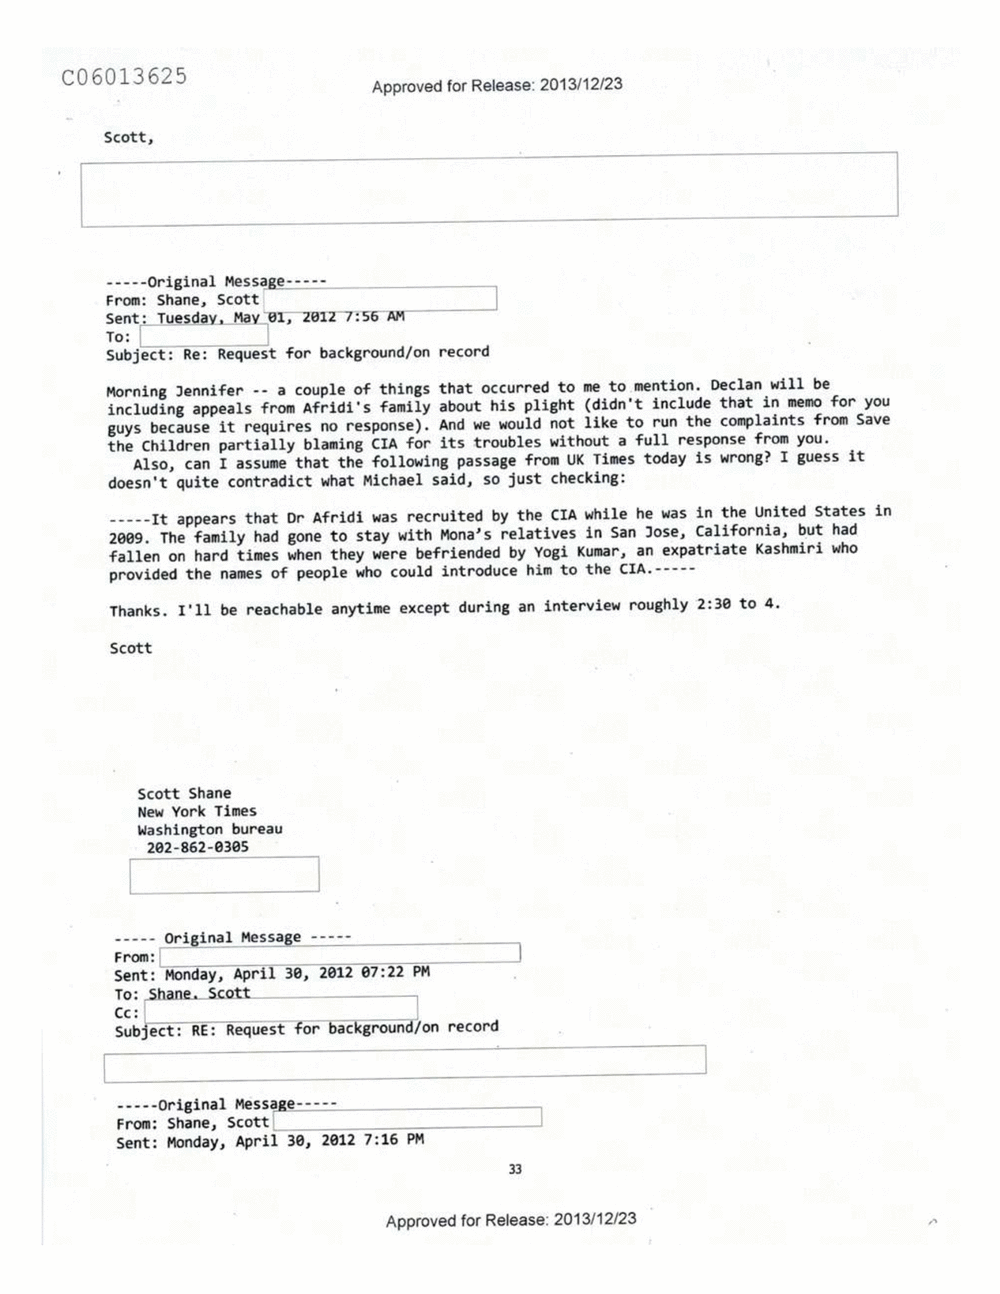 Page 461 from Email Correspondence Between Reporters and CIA Flacks